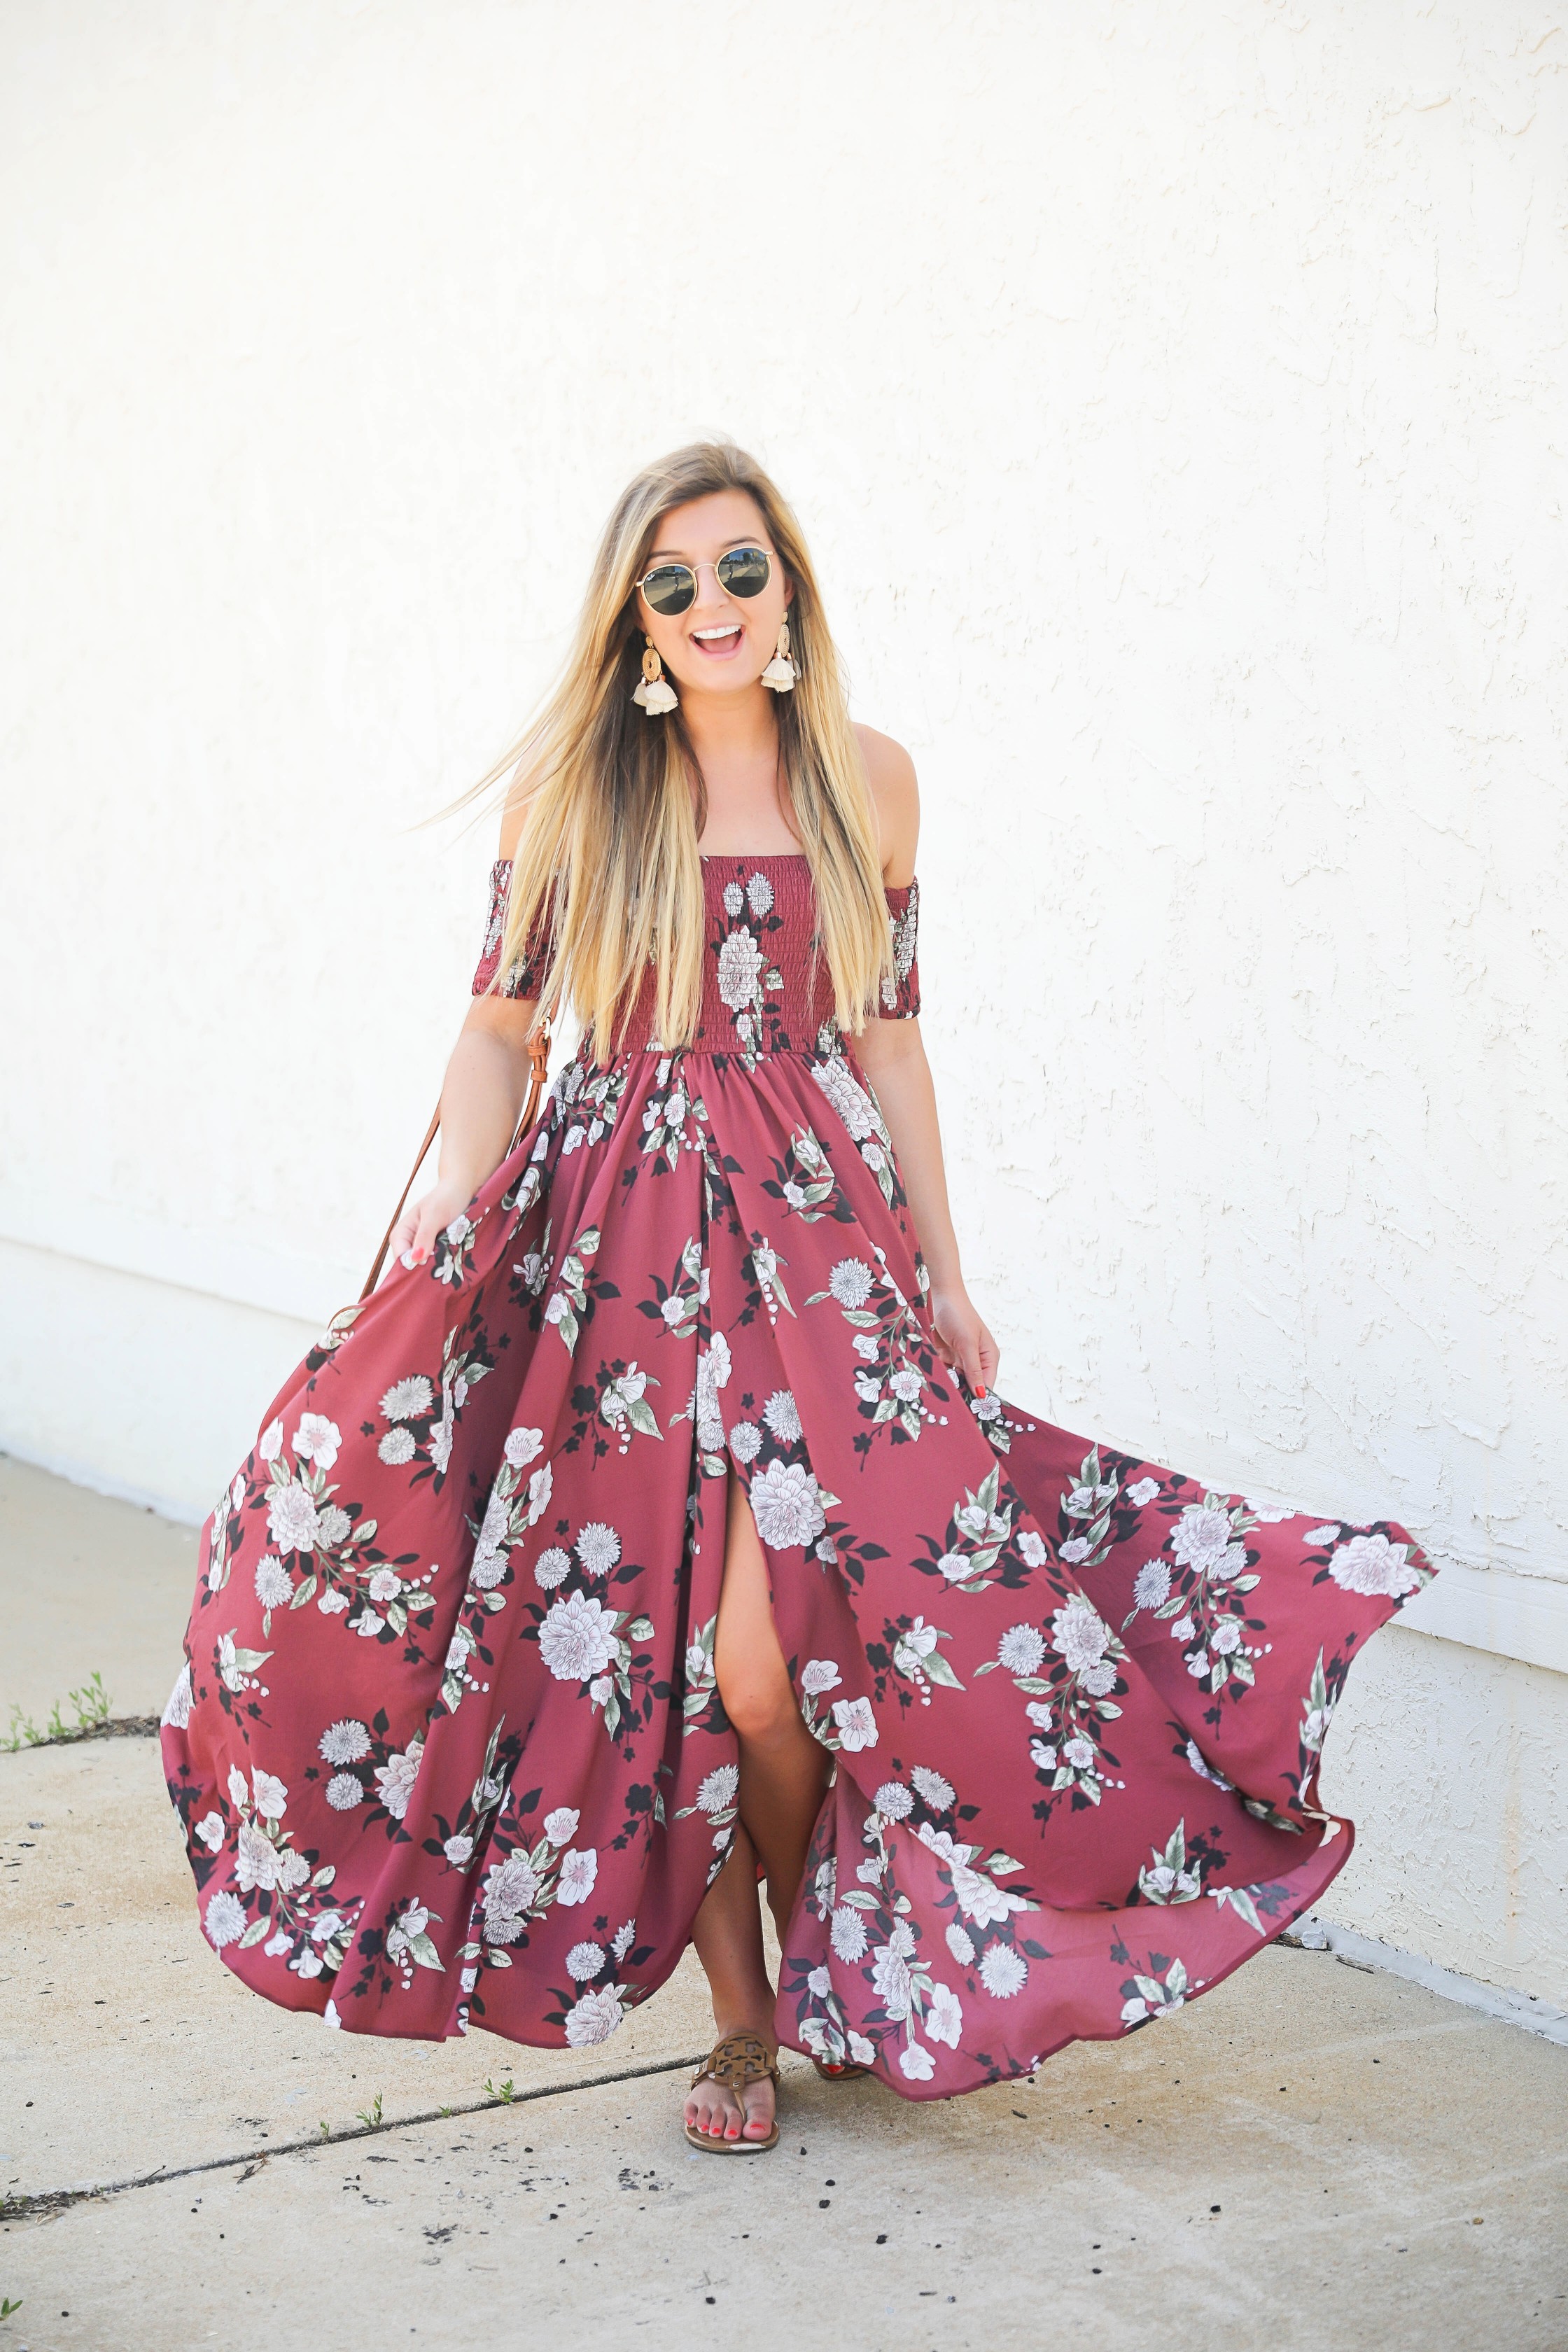 Mauve floral maxi dress from Showpo! This cute sundress is perfect for summer! I love off the shoulder dresses and it's so cute that it is maxi! Details on fashion blog daily dose of charm by lauren lindmark